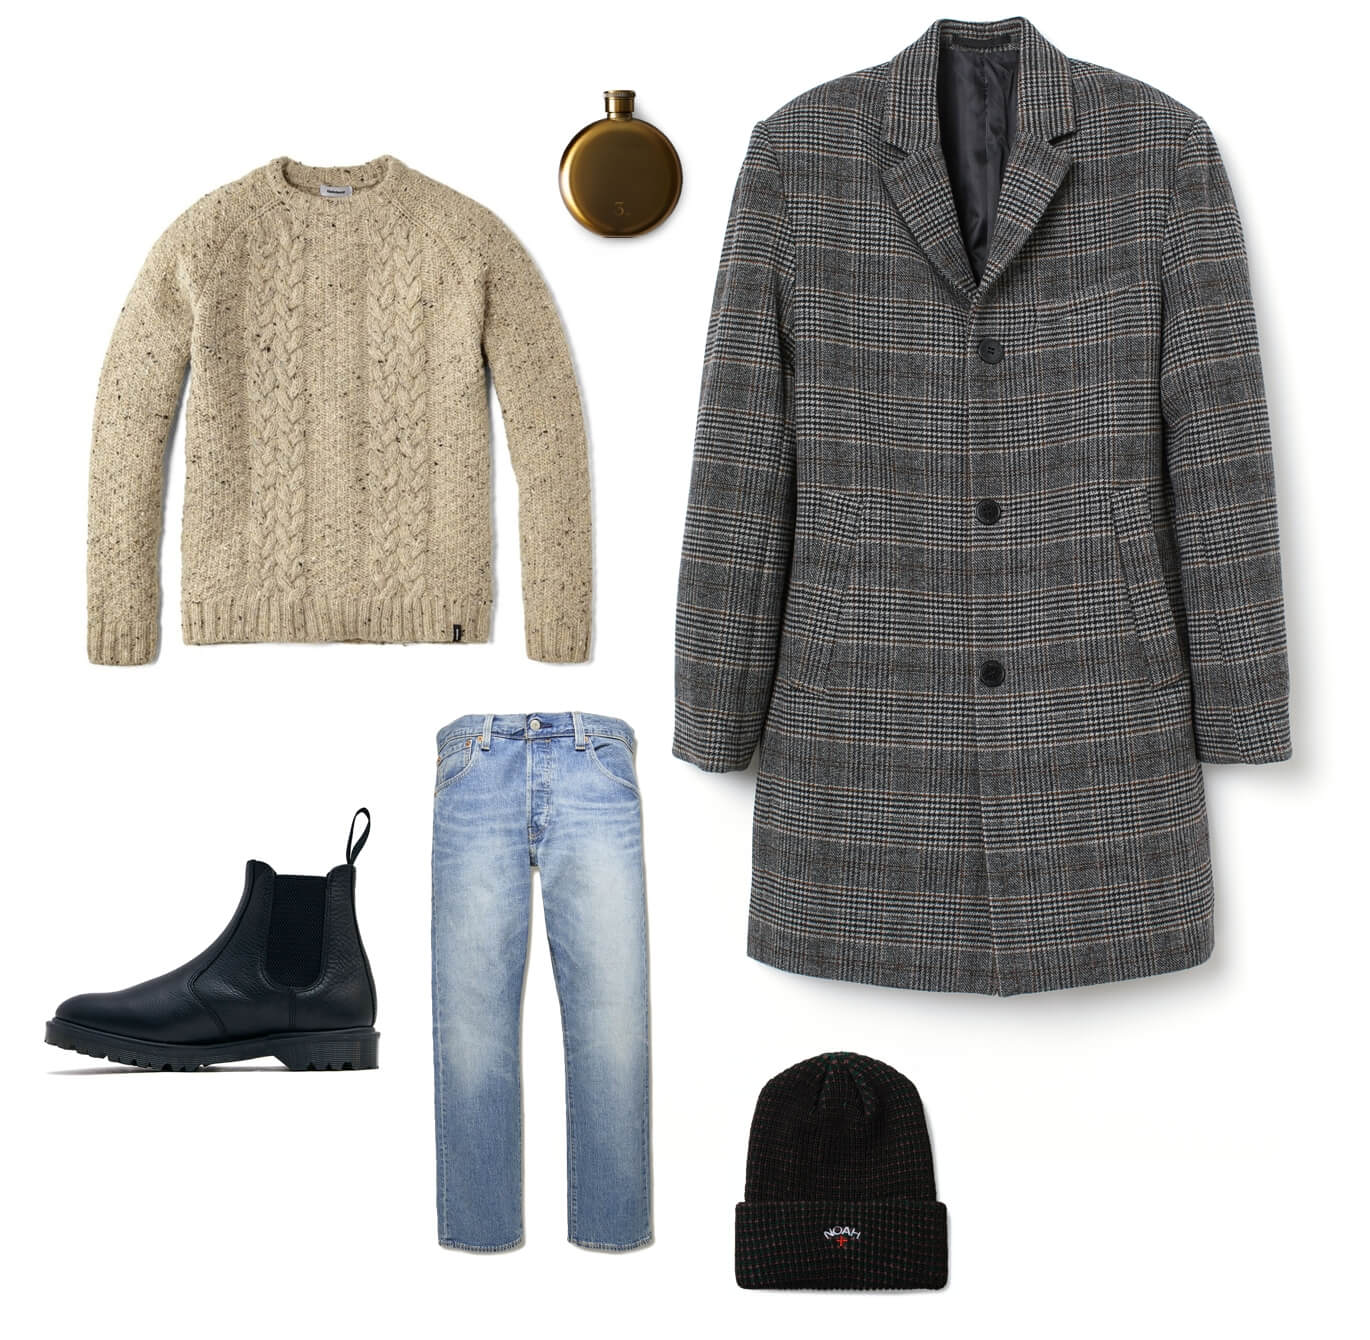 Thanksgiving weekend menswear outfit inspiration